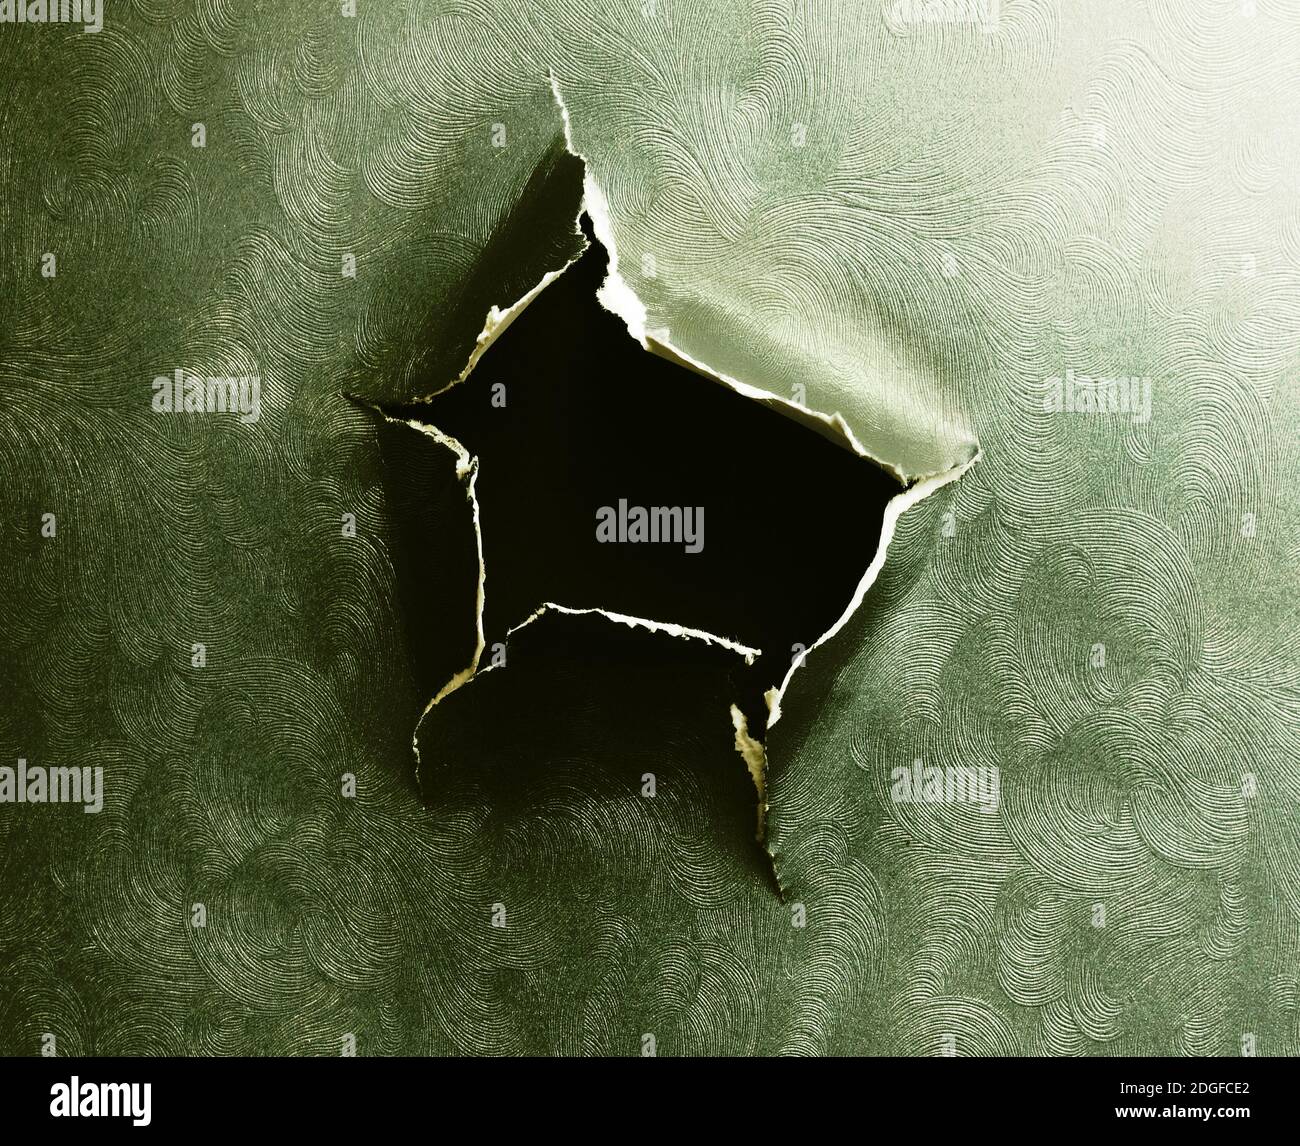 Hole torn in grunge textured ripped paper Stock Photo